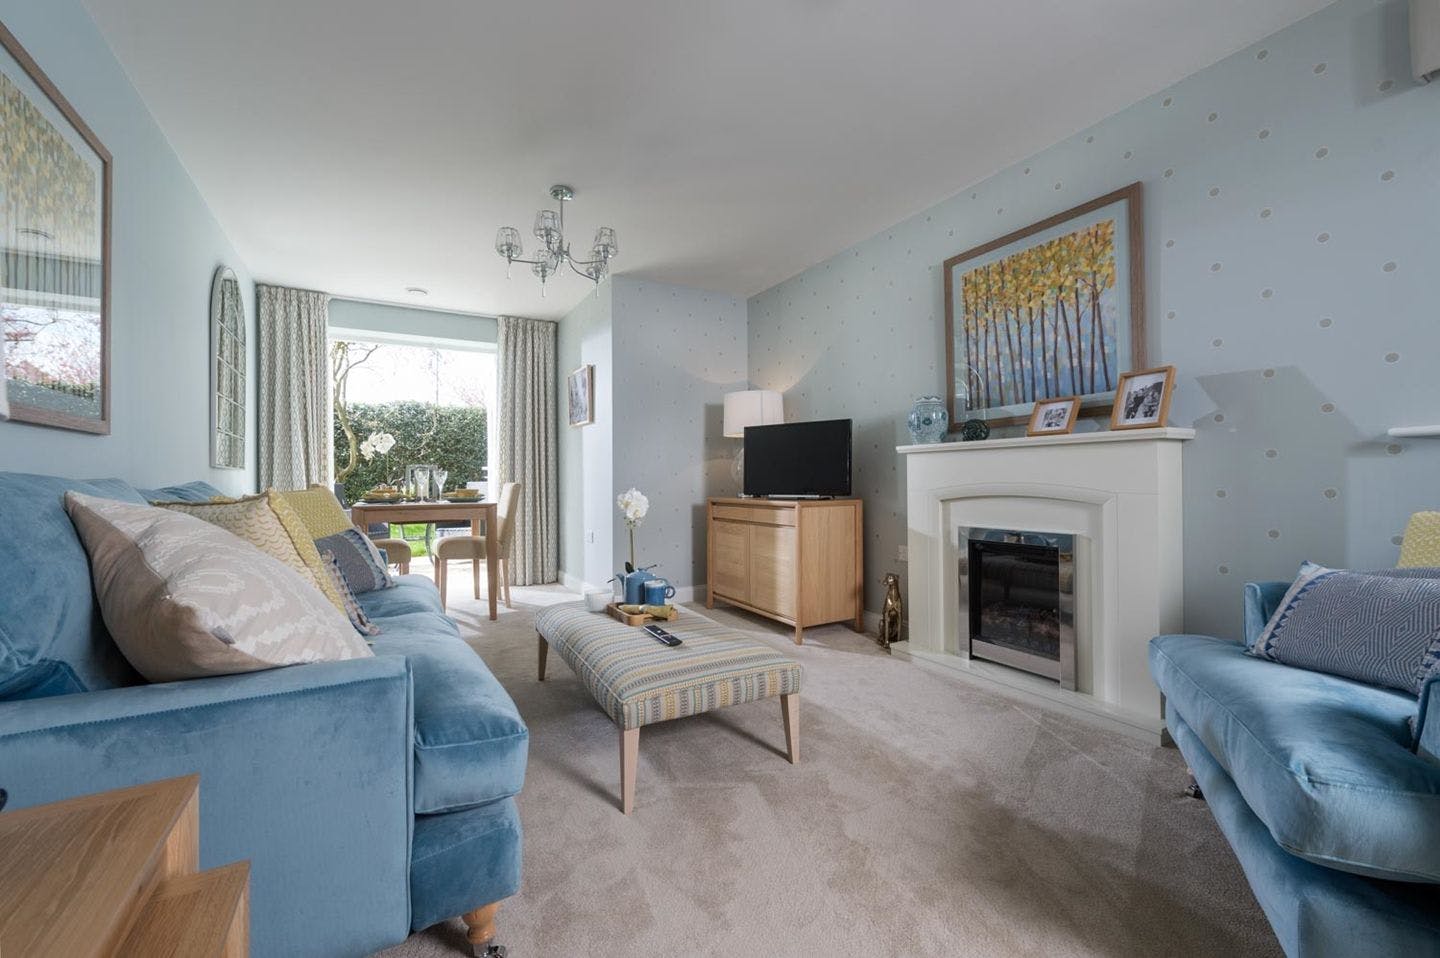 Living Room of Fairway View Two Bedroom Apartment For Sale in East Riding Yorkshire, Yorkshire and Humber